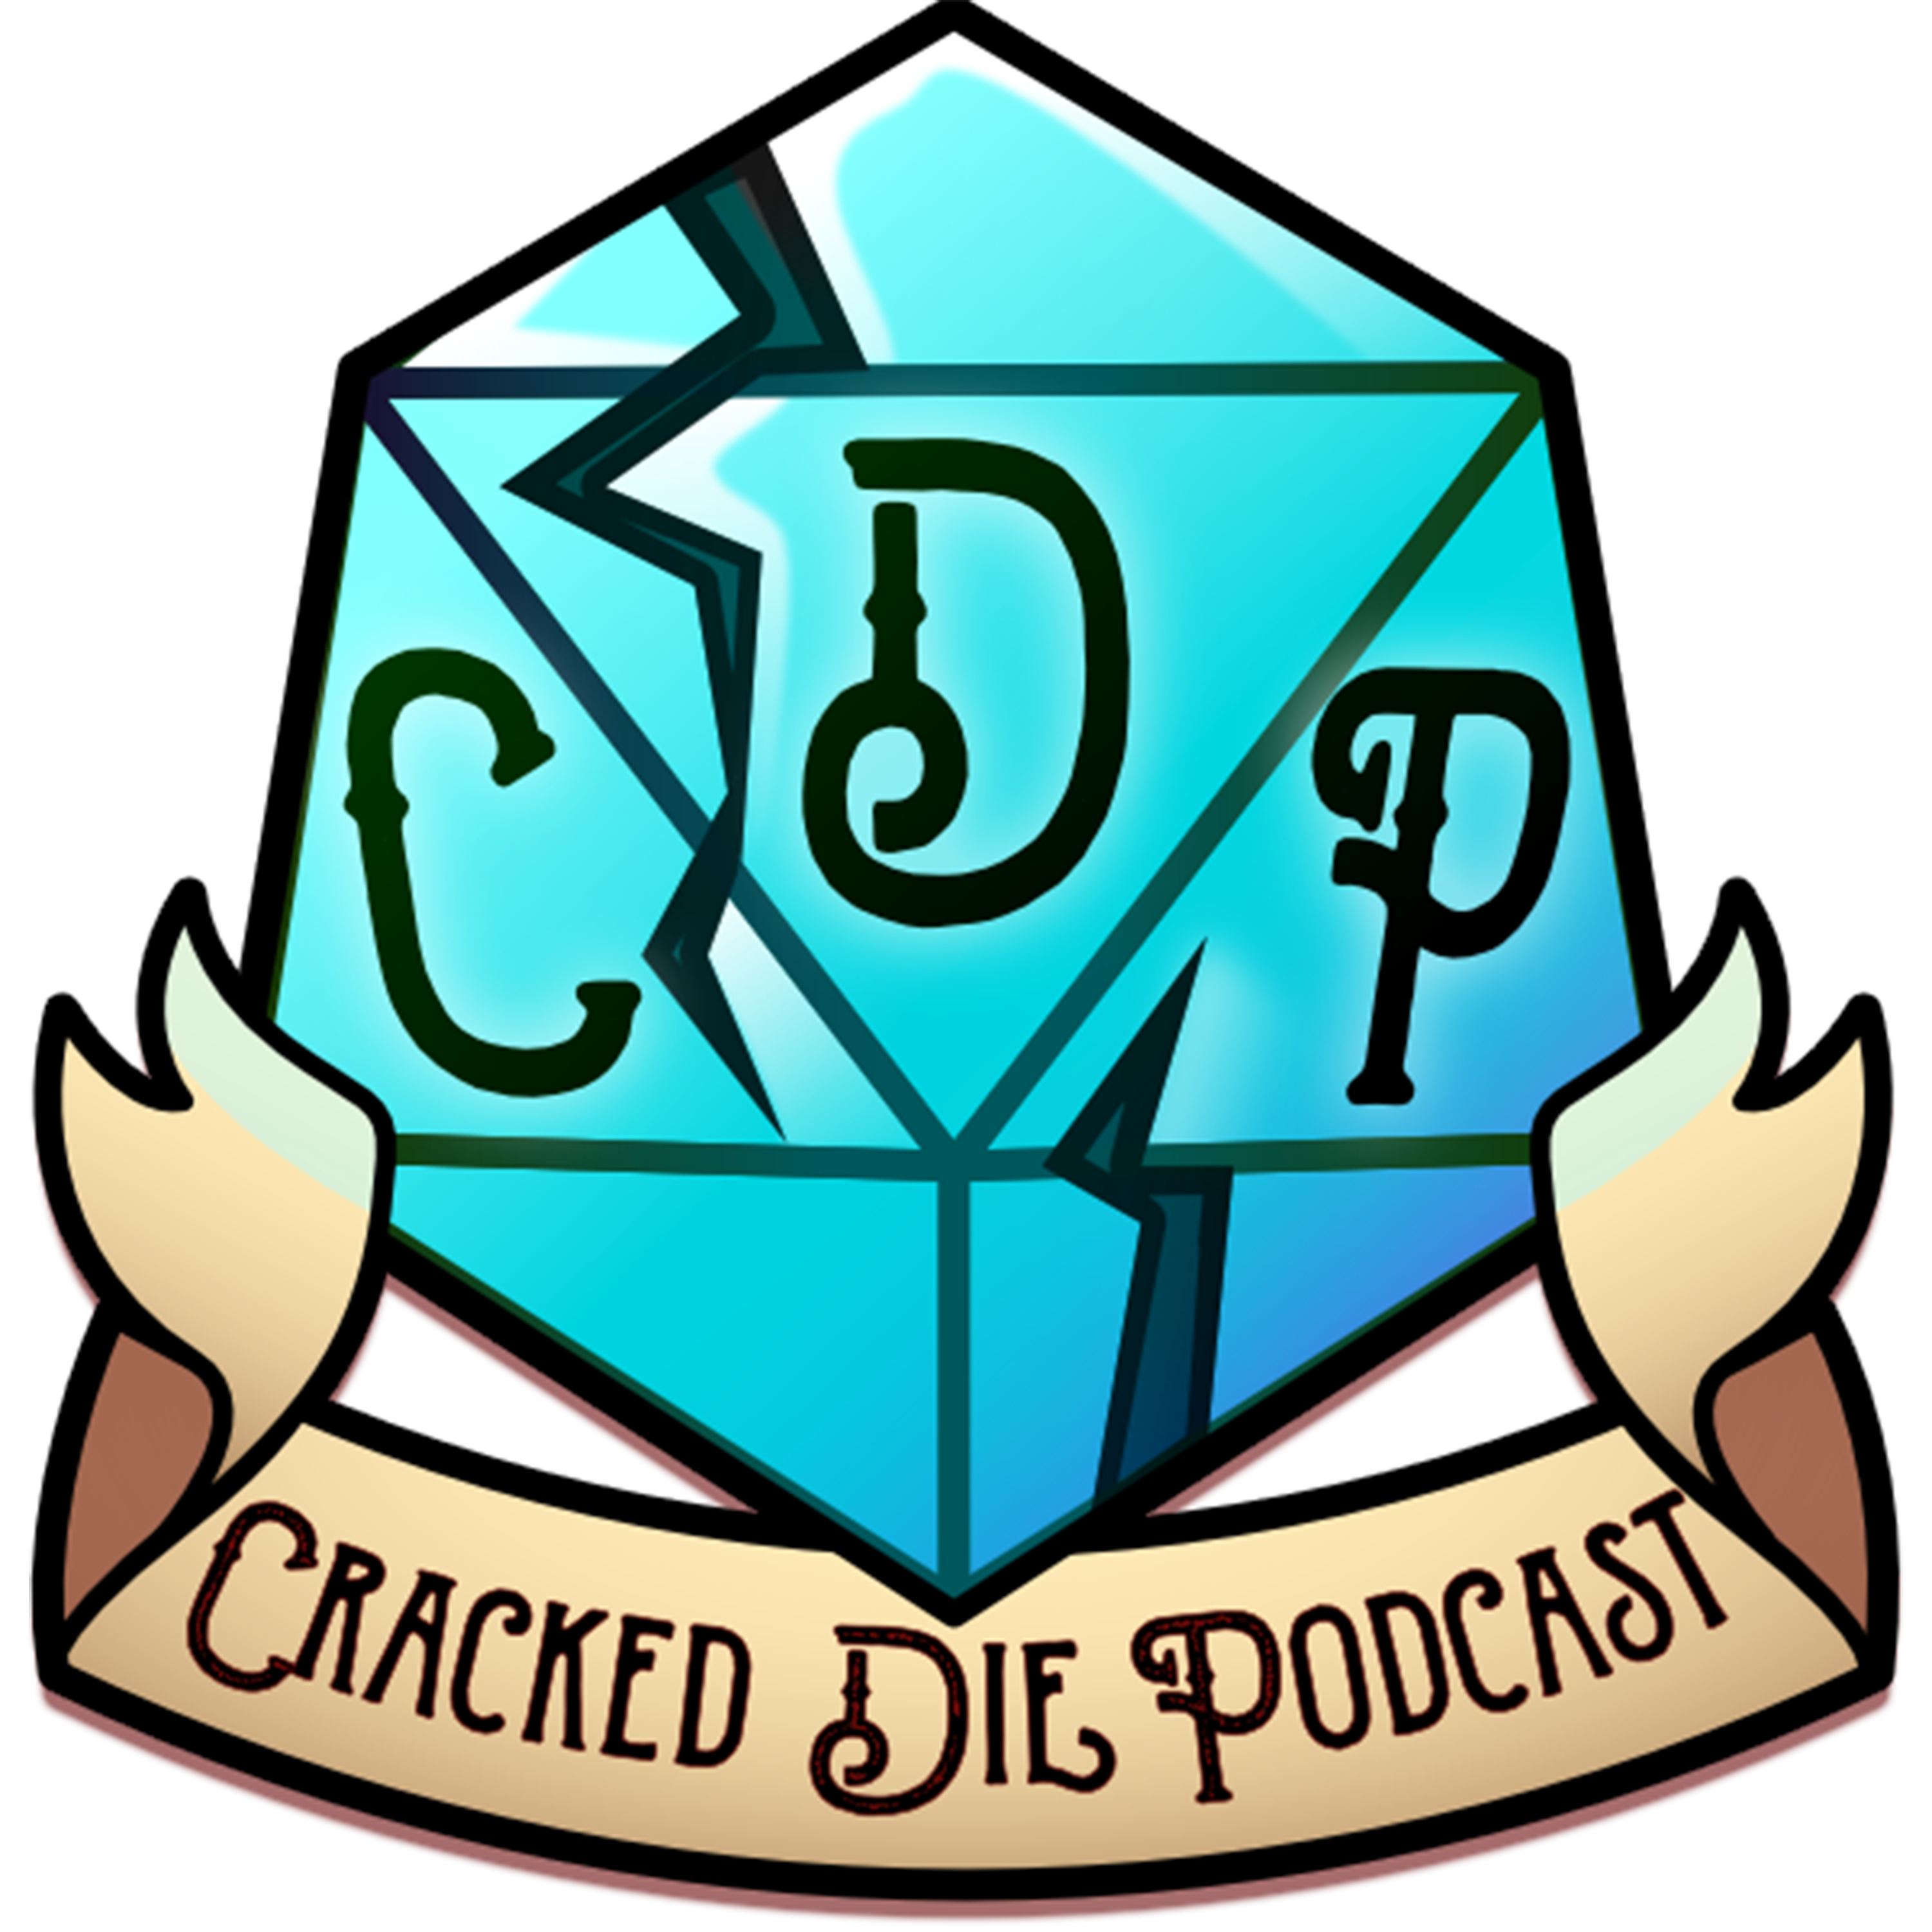 The Cracked Die Podcast - Episode 110 - Let's Go Fly a Kite